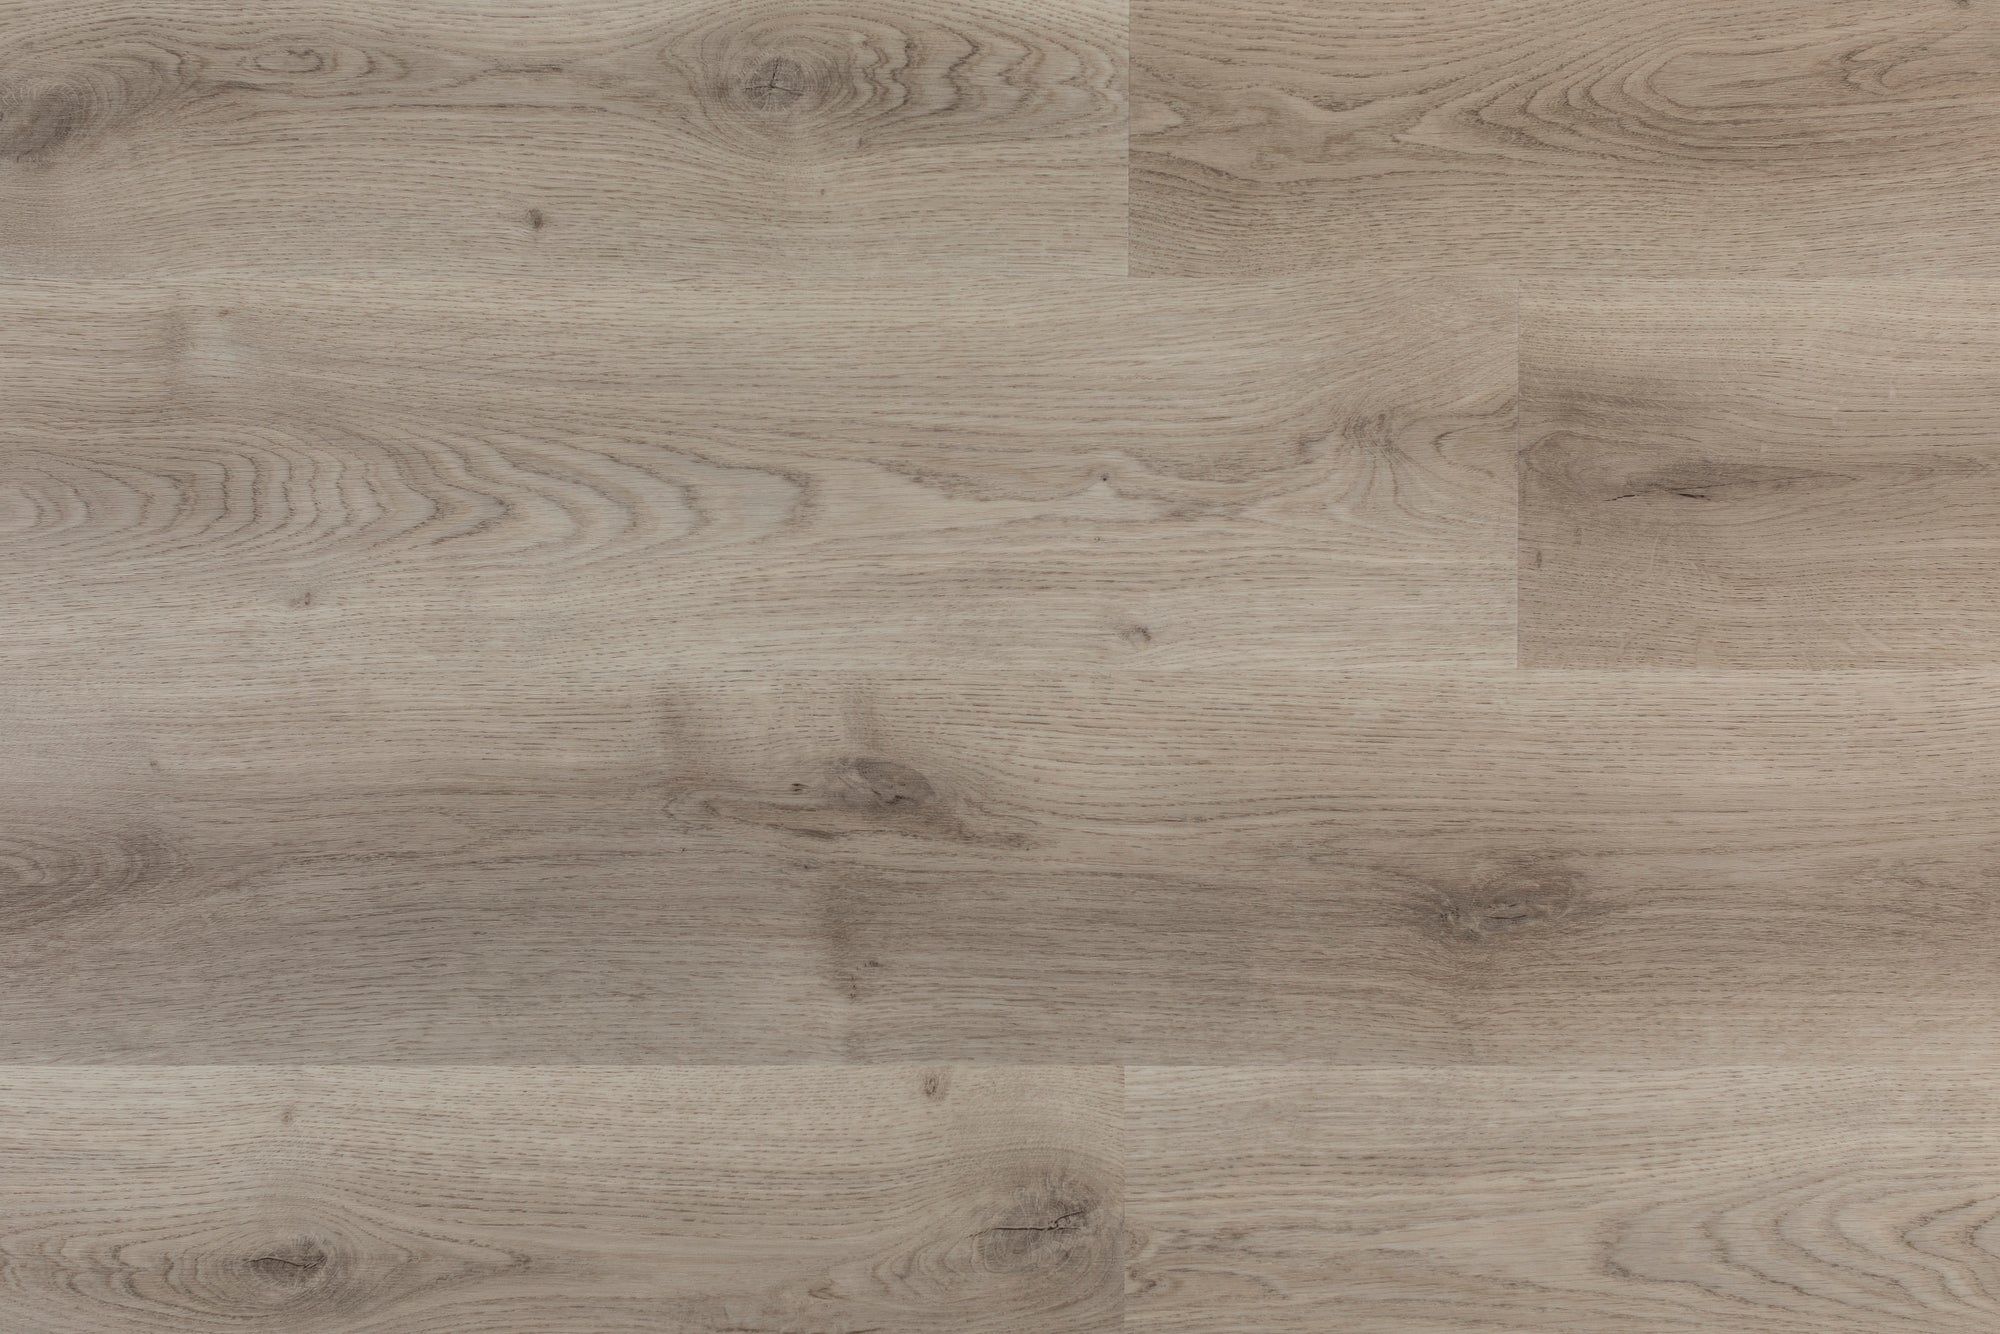  Dacite Maverick Free Sample engineered hardwood floor from our free sample collection